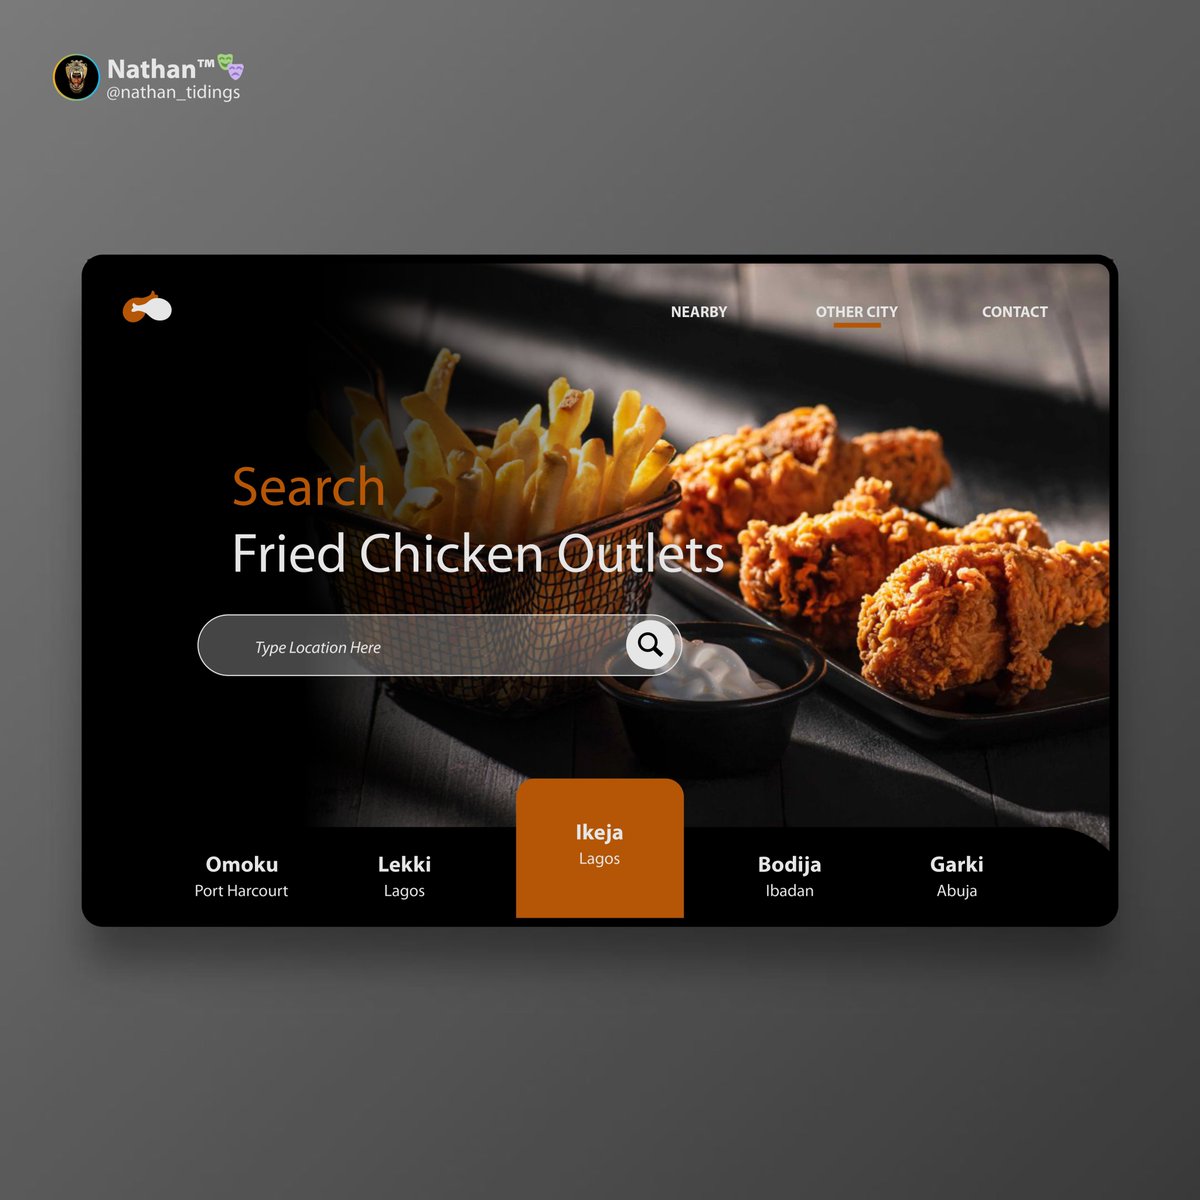 What do you'll think about this design?

#uiuxdesigner #userexperiencedesign #webdeveloper #uiuxsupply #uxresearch #landingpage #creative #illustration #uxuidesign #appdesigner #digitaldesign #webdesigners #branding #interfacedesign #graphicdesigner #uxprocess